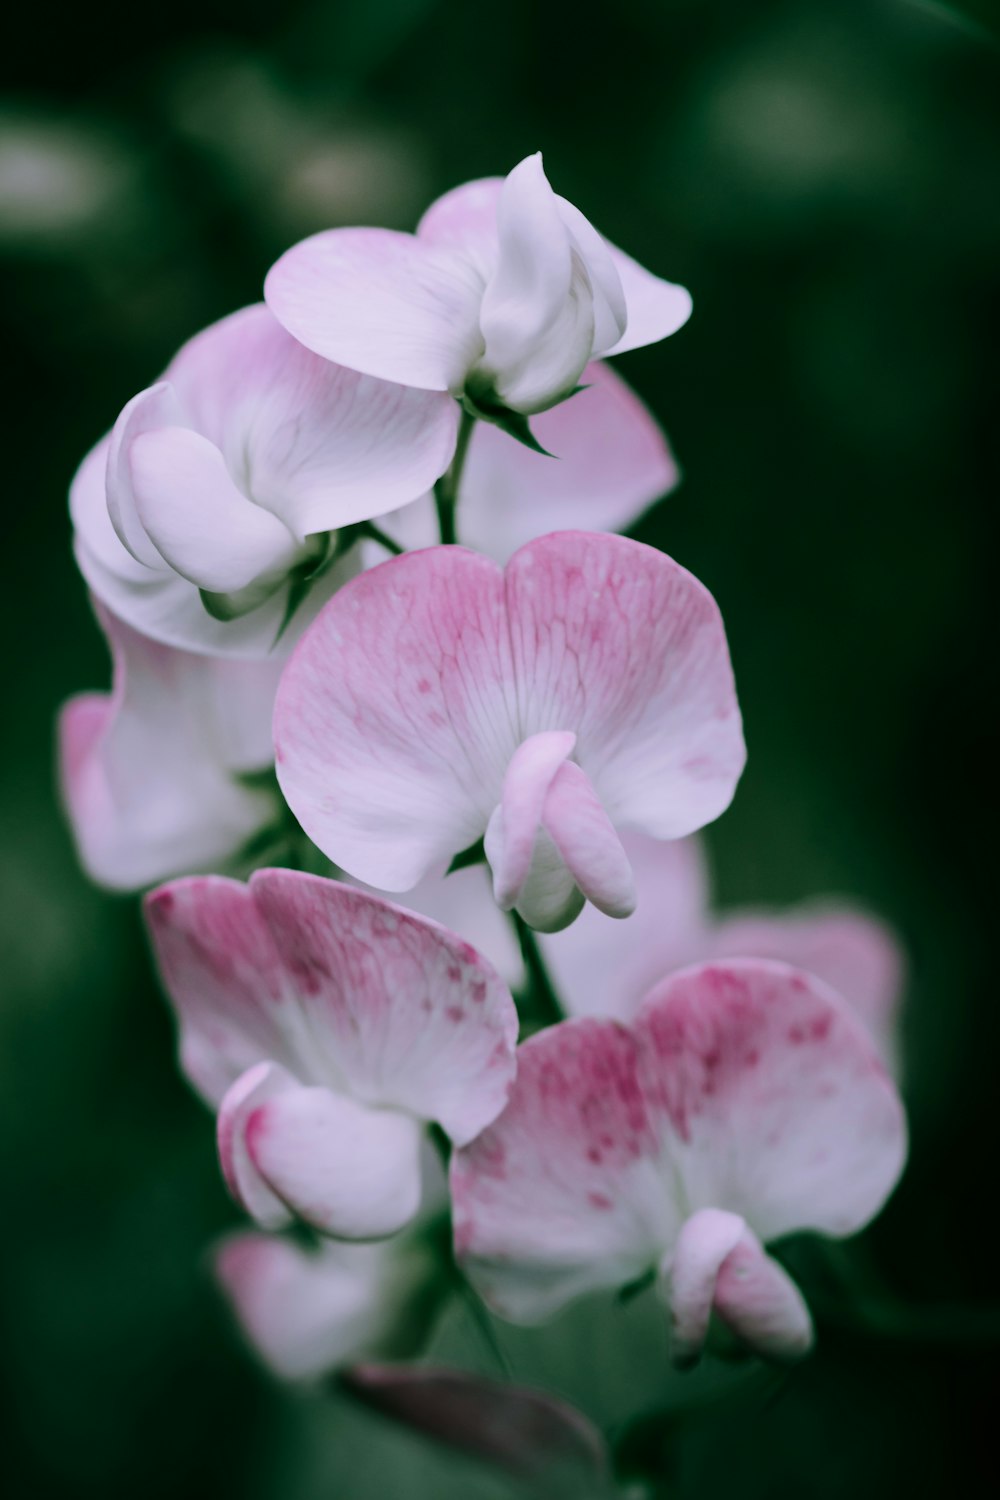 close-up photo of pink and white orchid